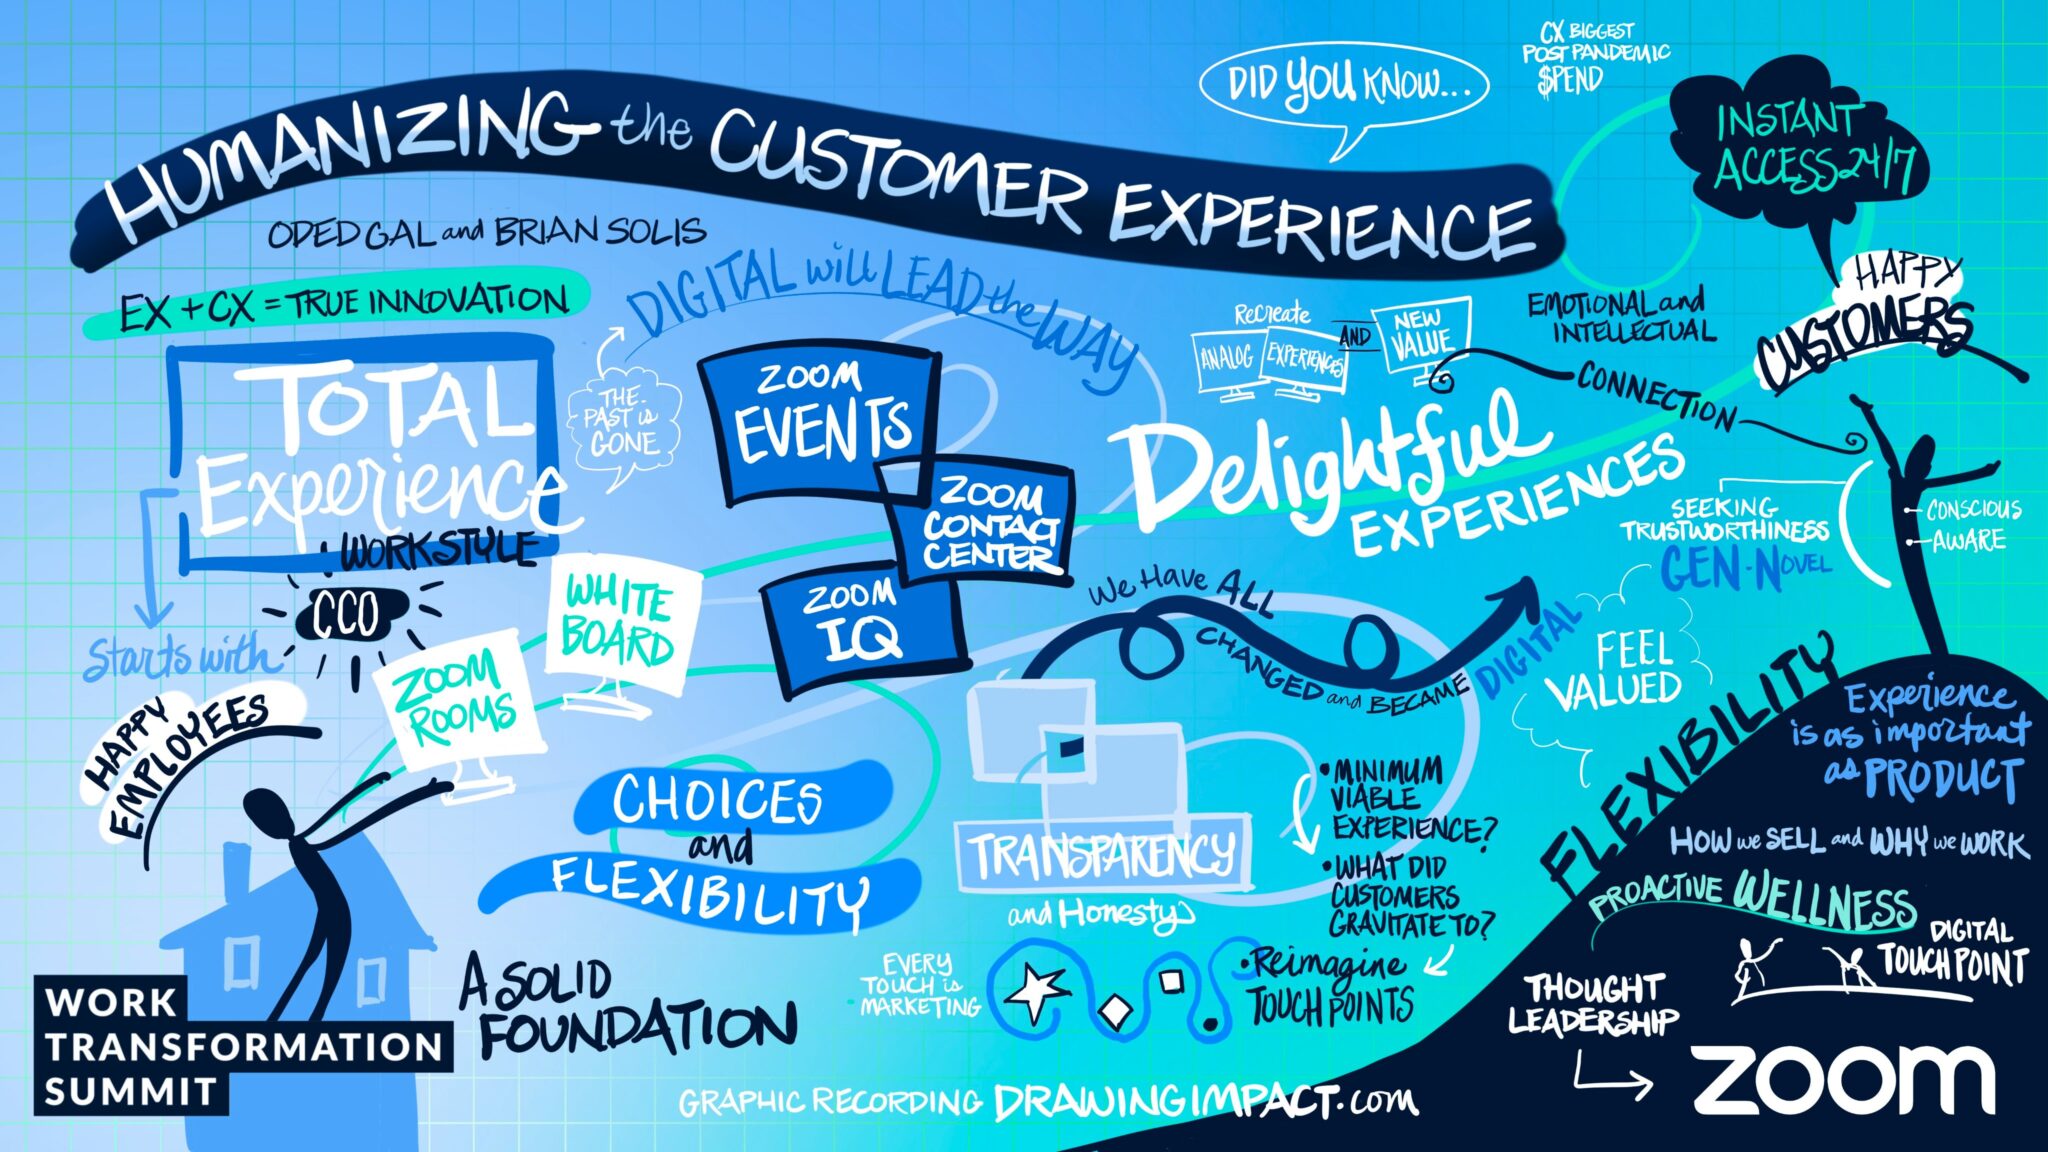 Zoom’s Work Transformation Summit Humanizing the Customer Experience